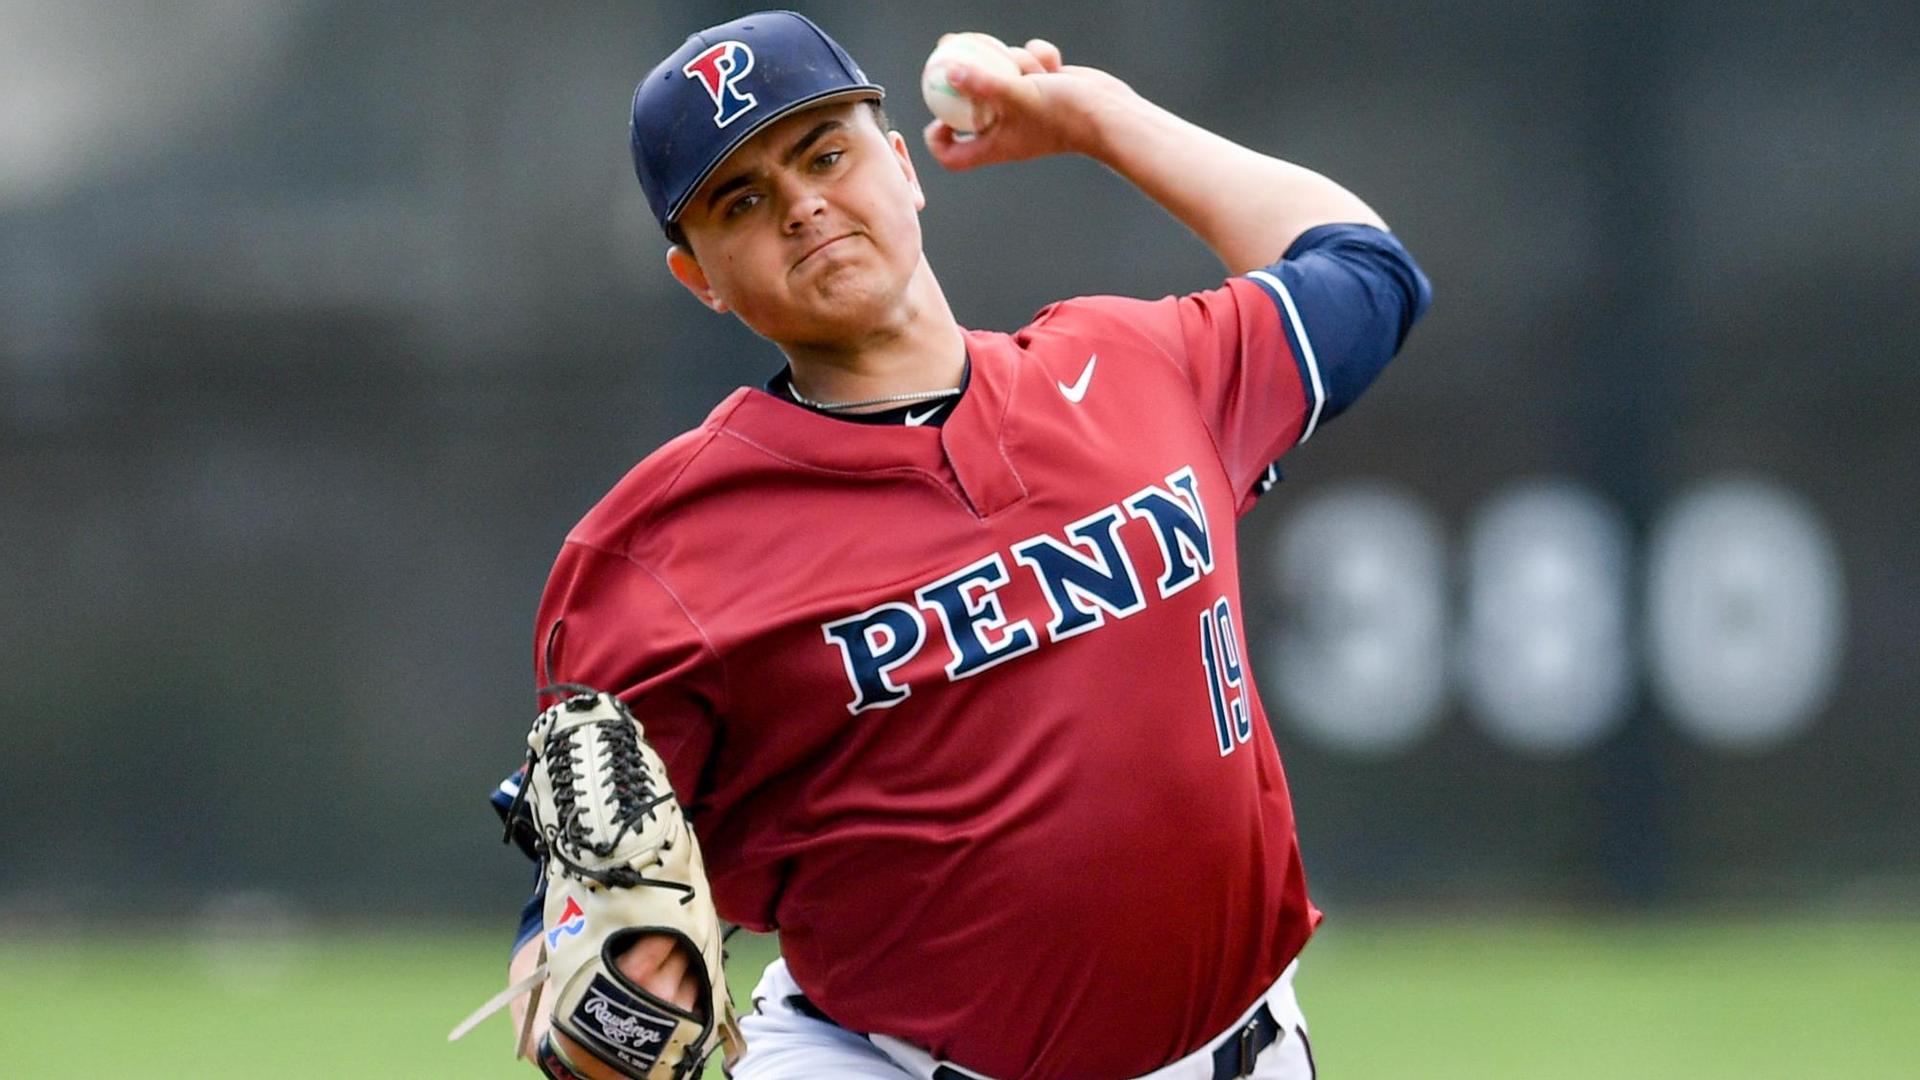 Penn baseball pitcher Coady makes a tough face while throwing from the mound.